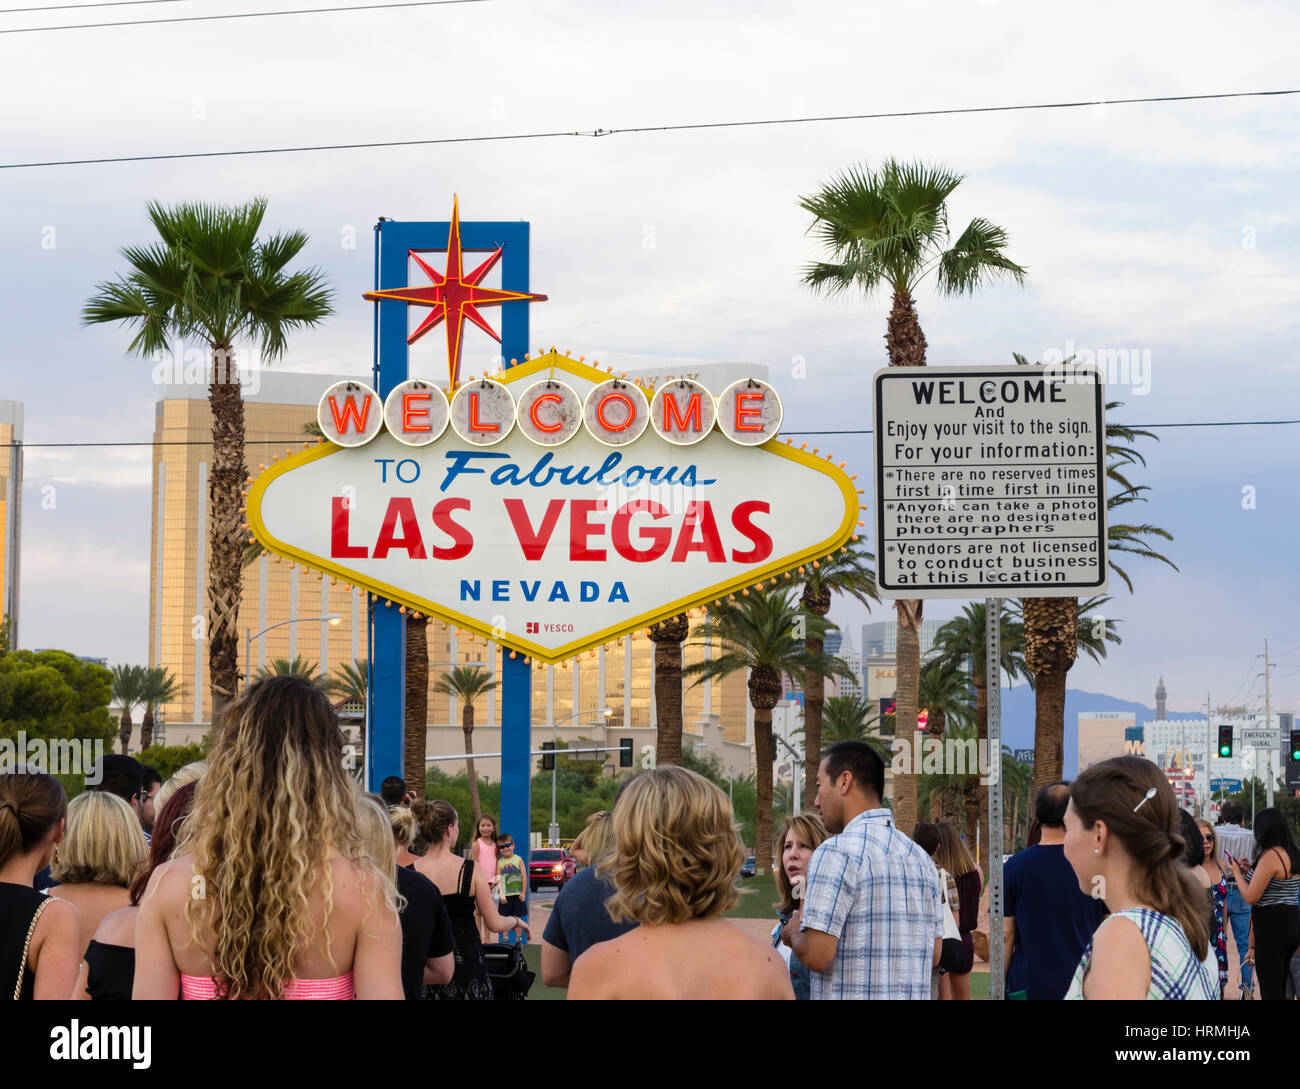 Crowds of tourists are gathering at the 'Welcome to Fabulous Las Vegas' sign, famous landmark at the end of the Las Vegas Boulevard and entry point to Stock Photo